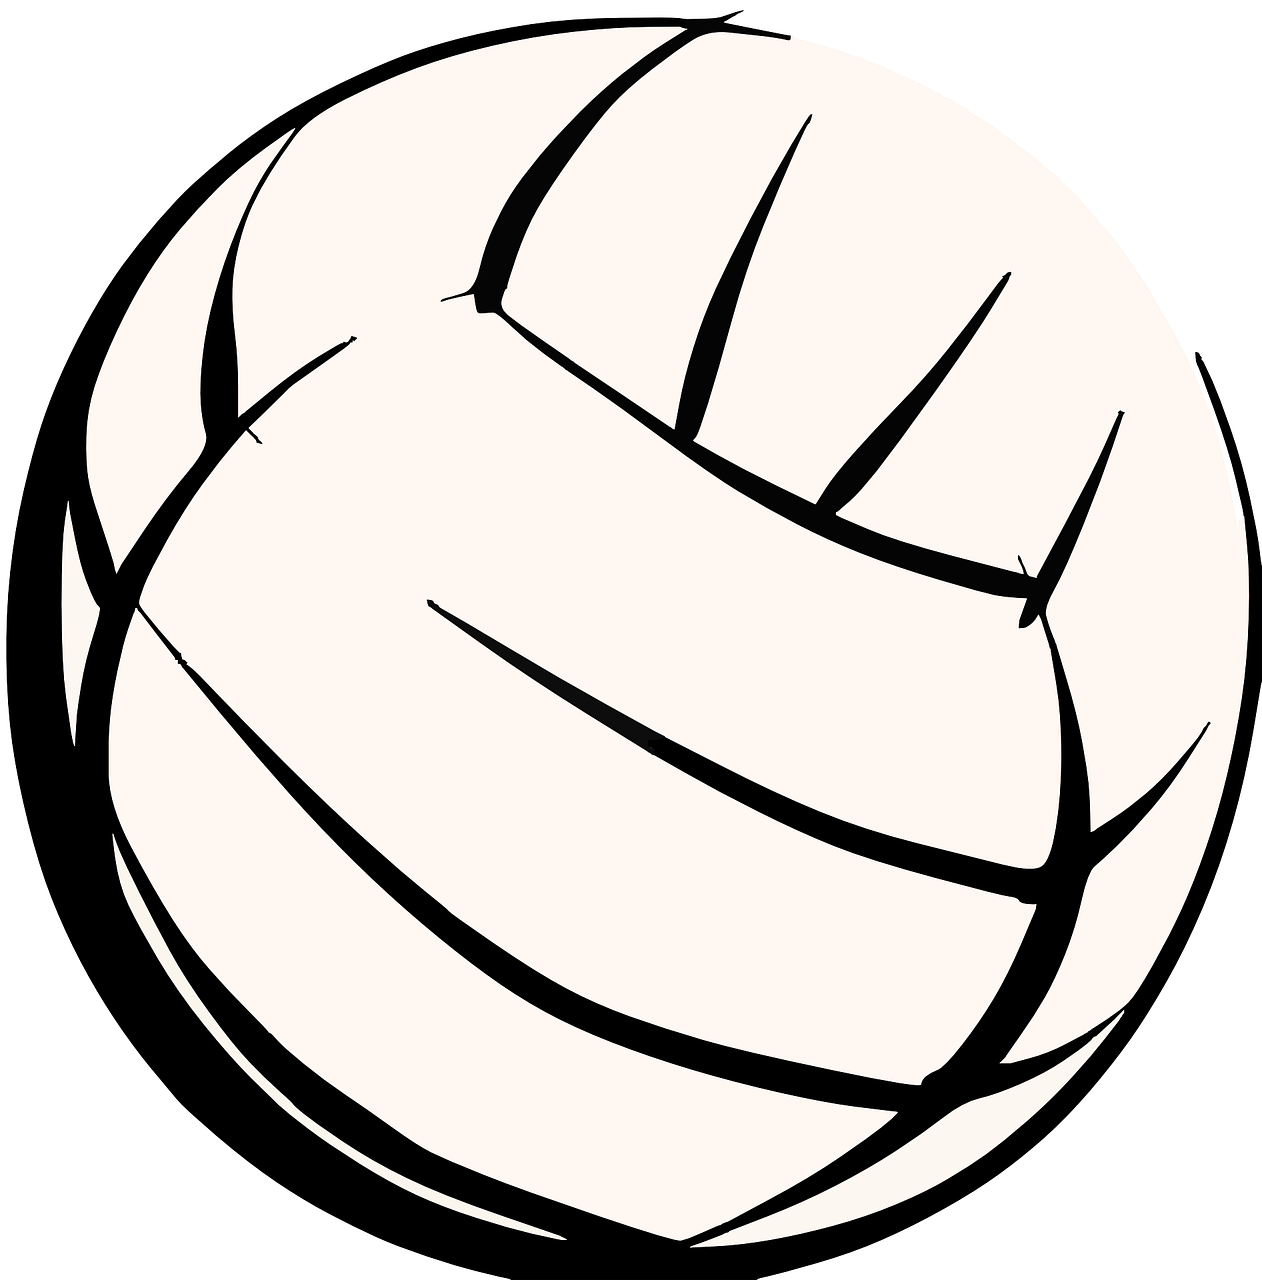 Image of a volleyball